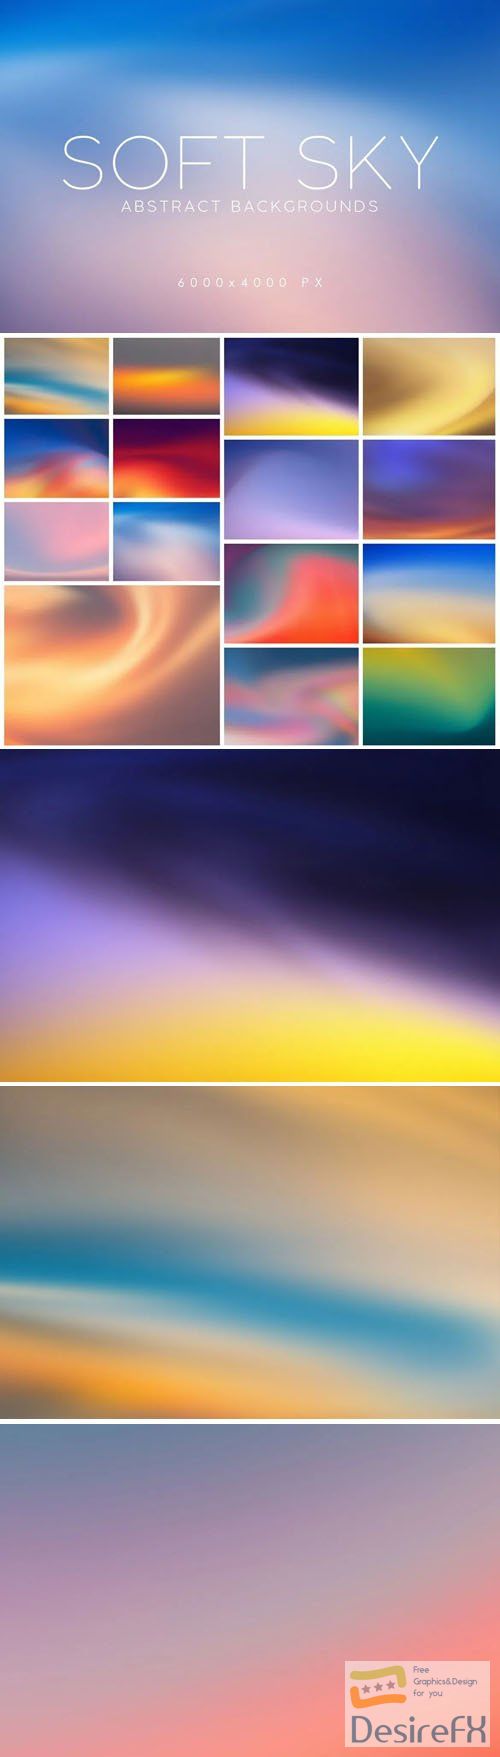 15 Soft Sky Abstract Backgrounds